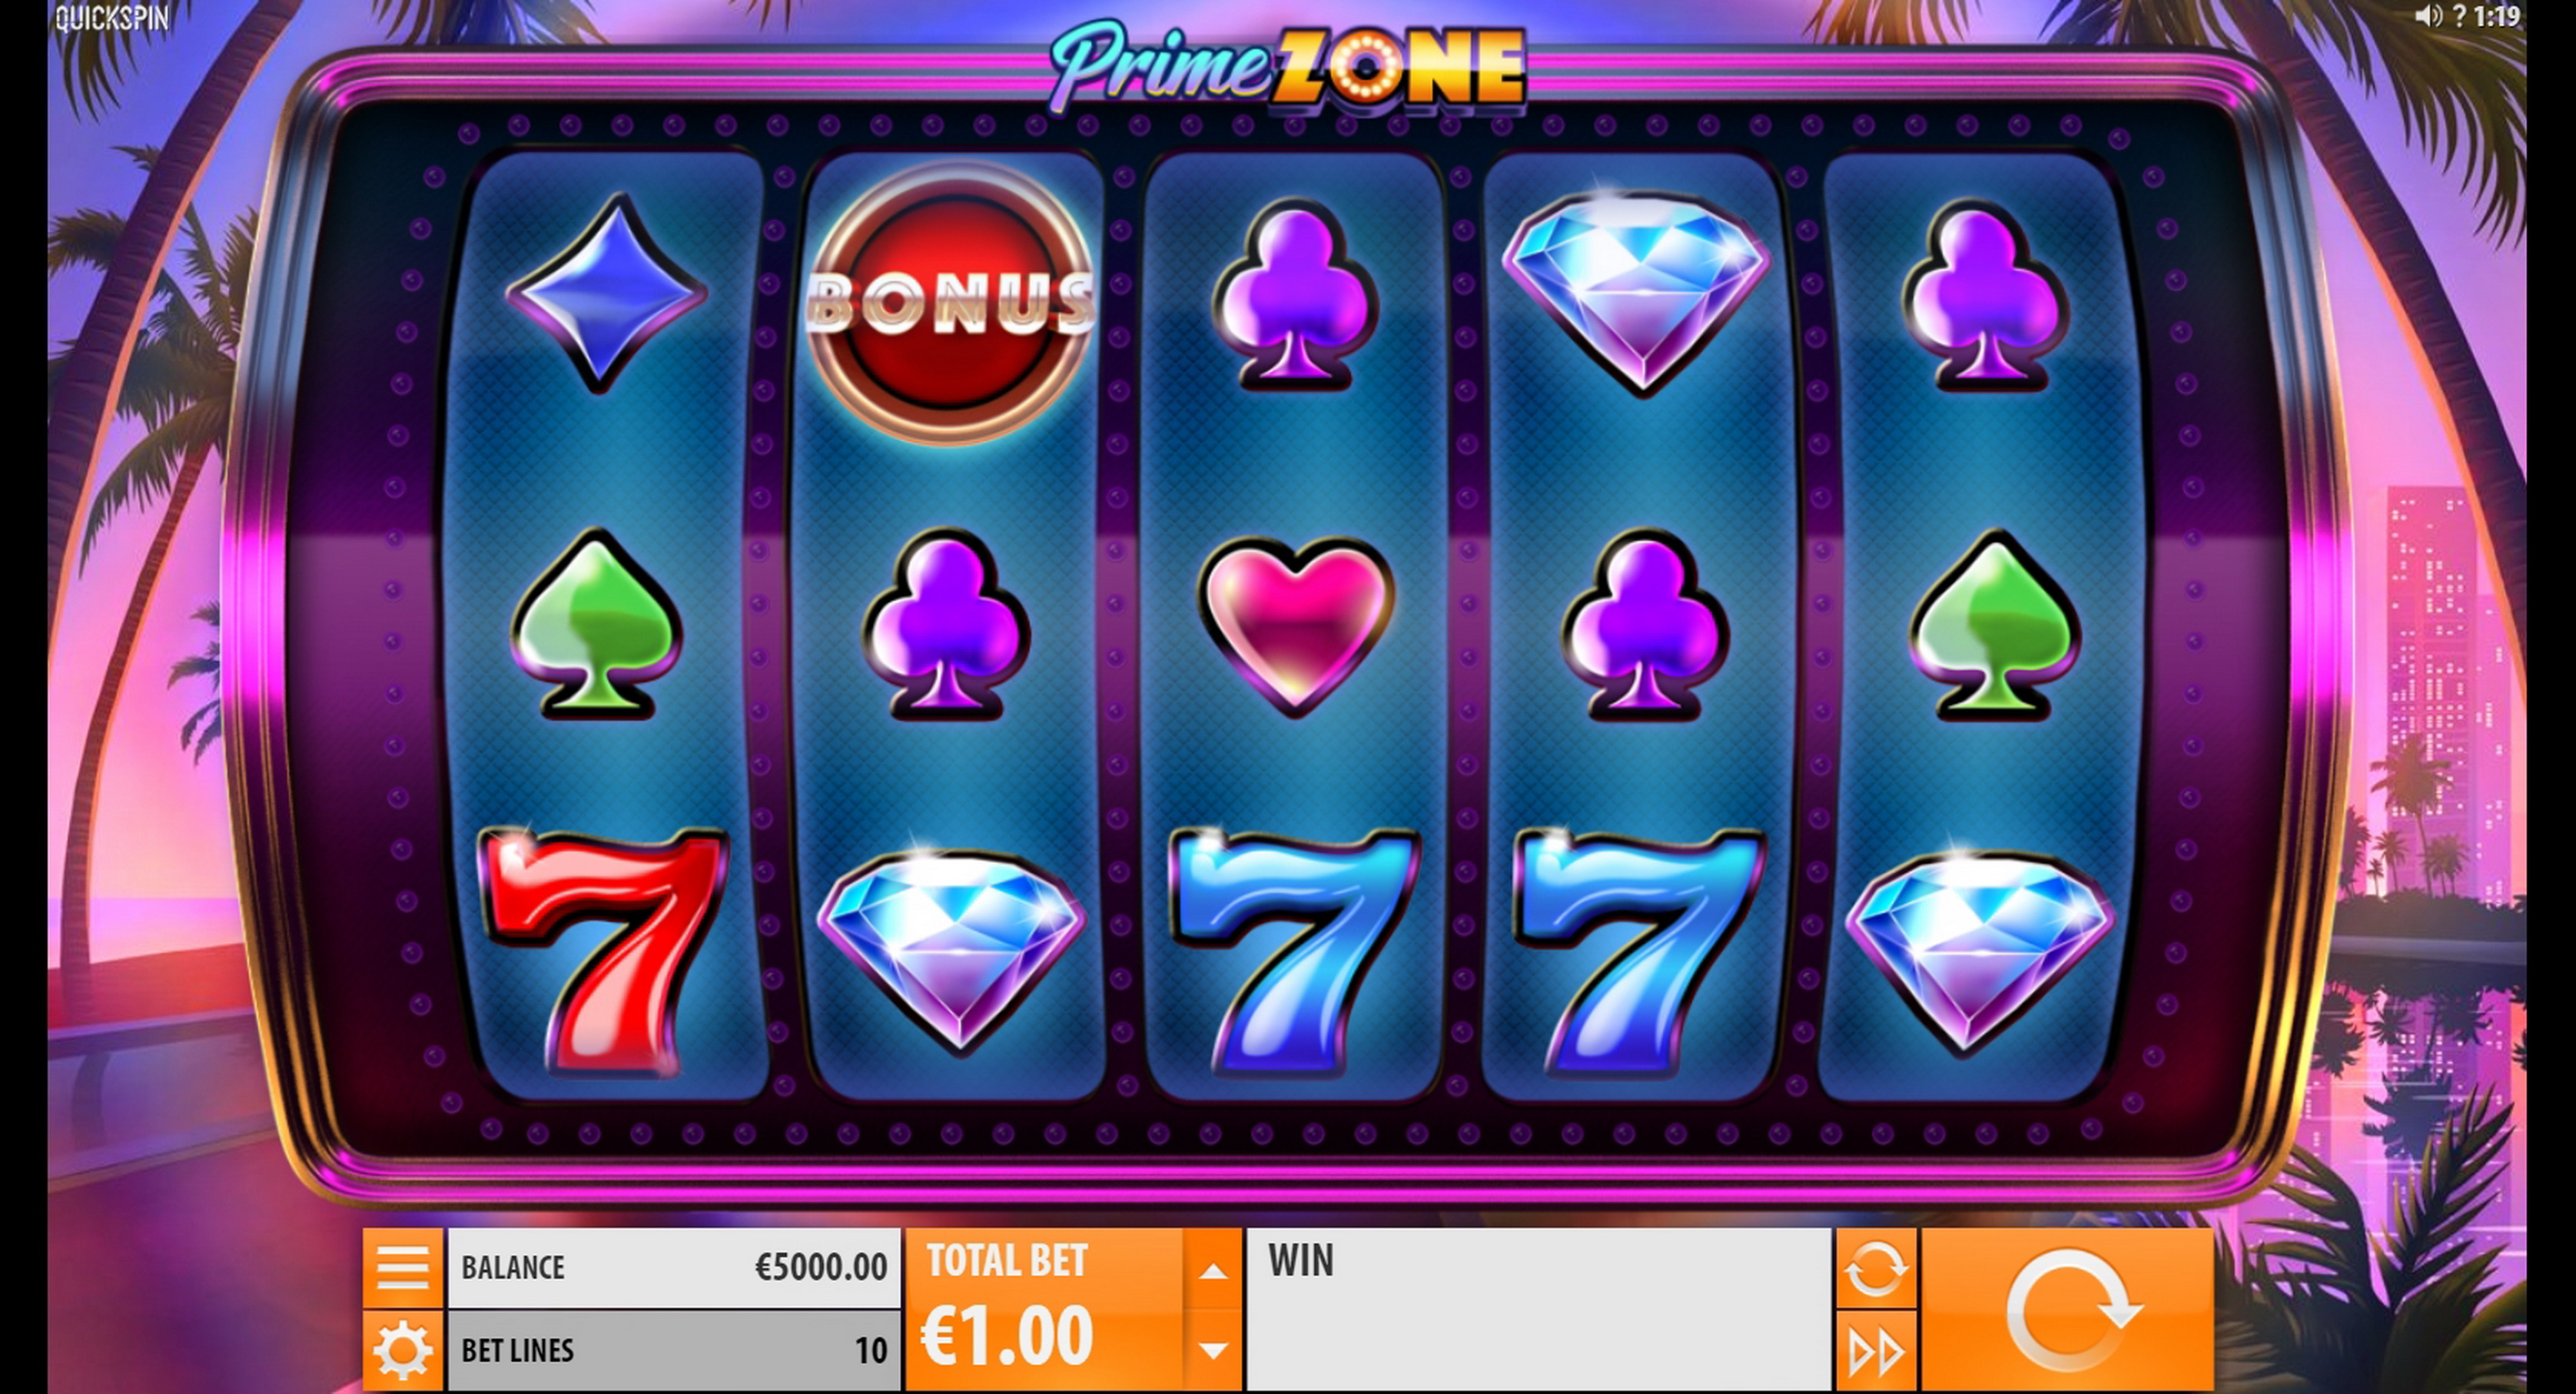 Reels in Prime Zone Slot Game by Quickspin